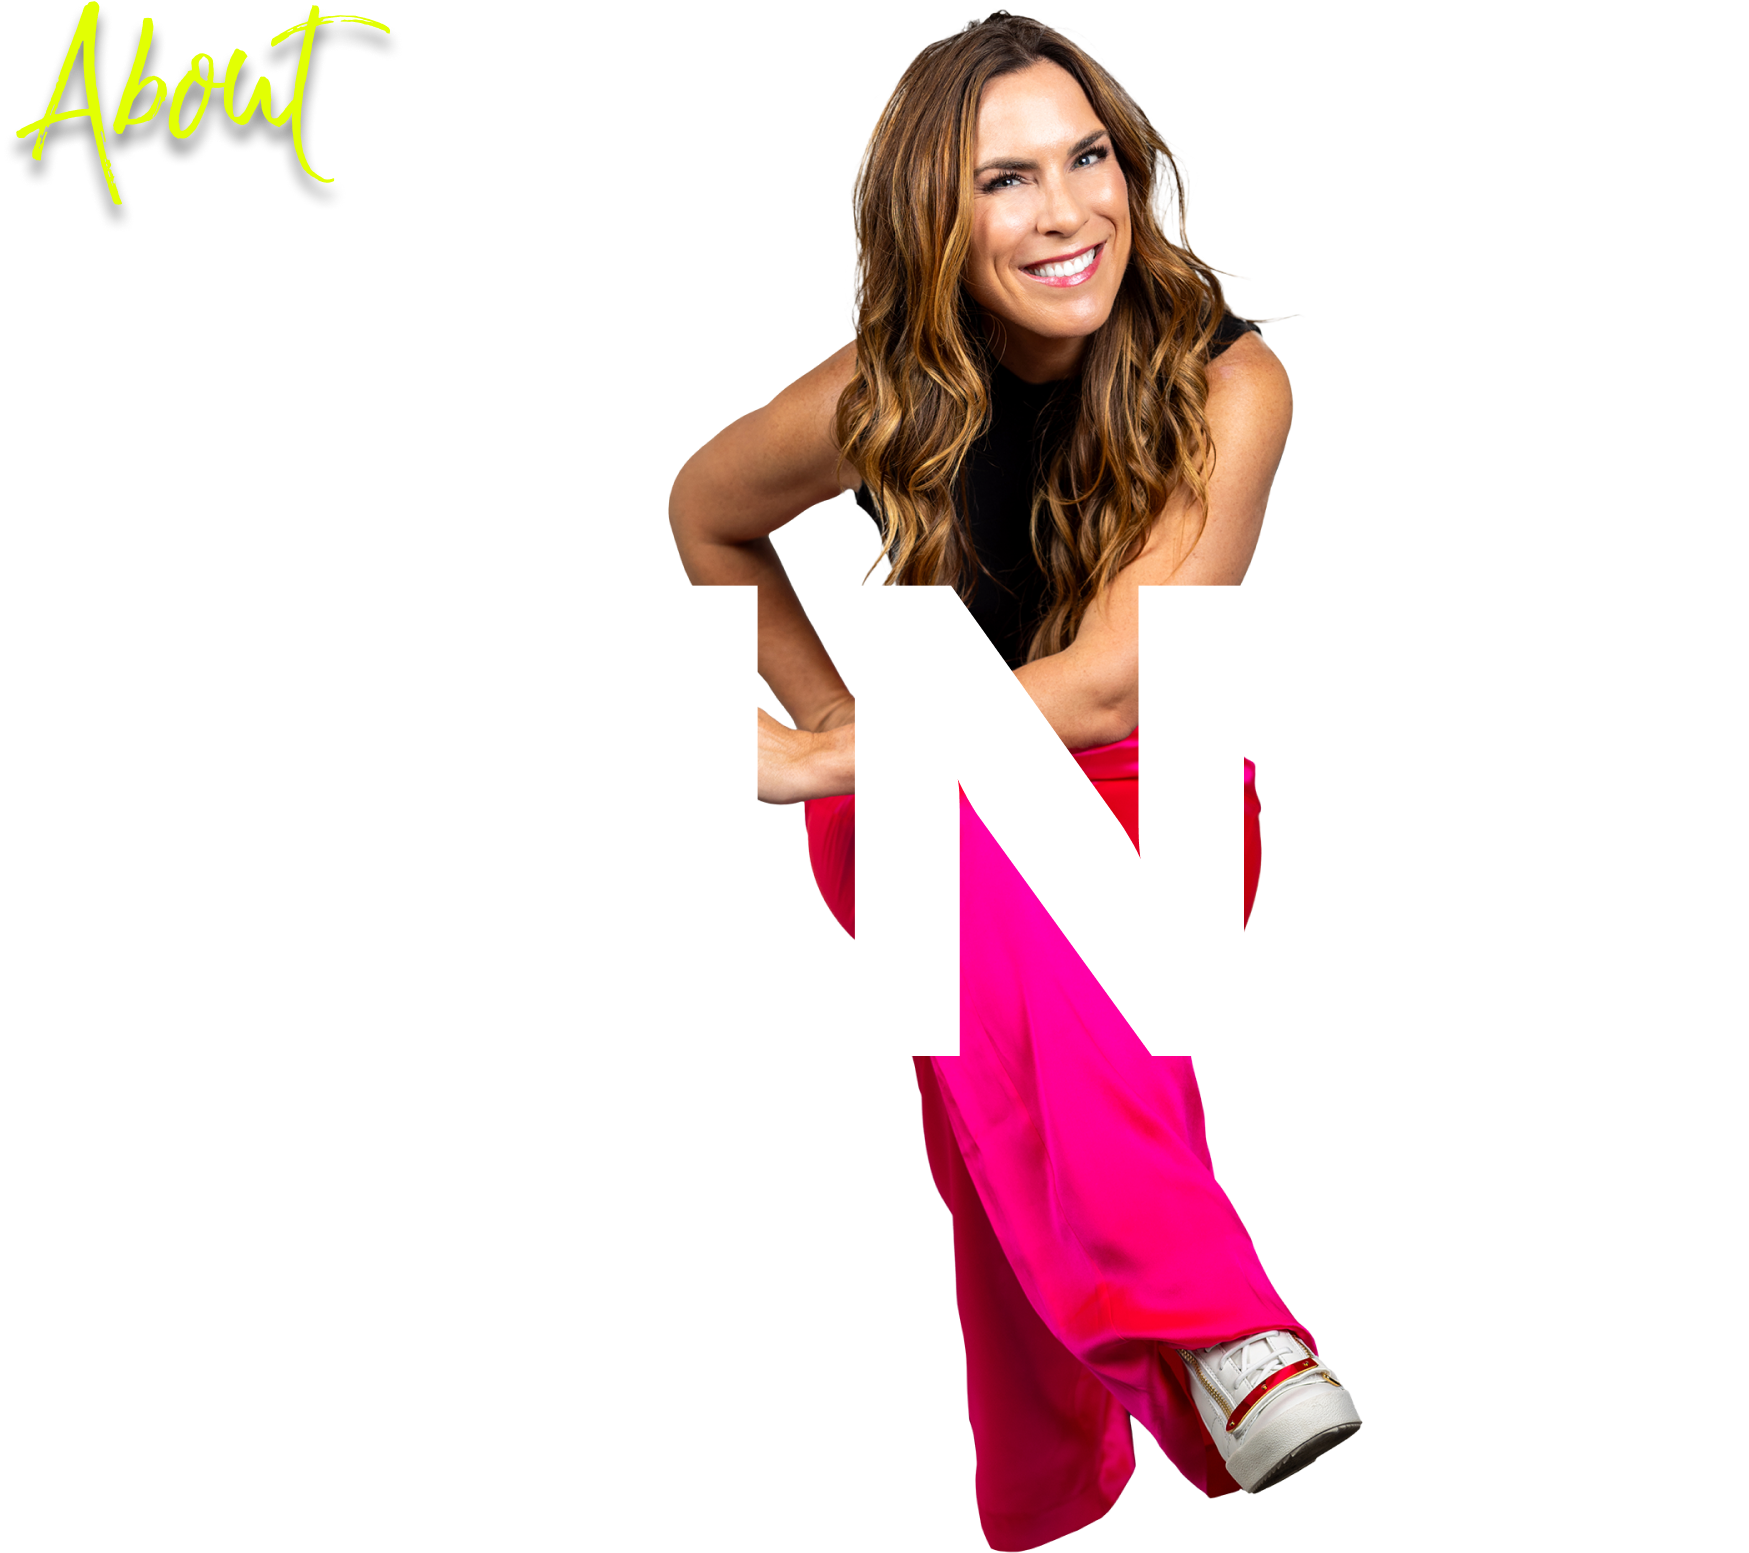 About Erin King Header- Erin King can be seen radiating confidence and joy seated smiling directly at the camera. She wears a sleek black blouse paired with vibrant pink pants with a transparent background.